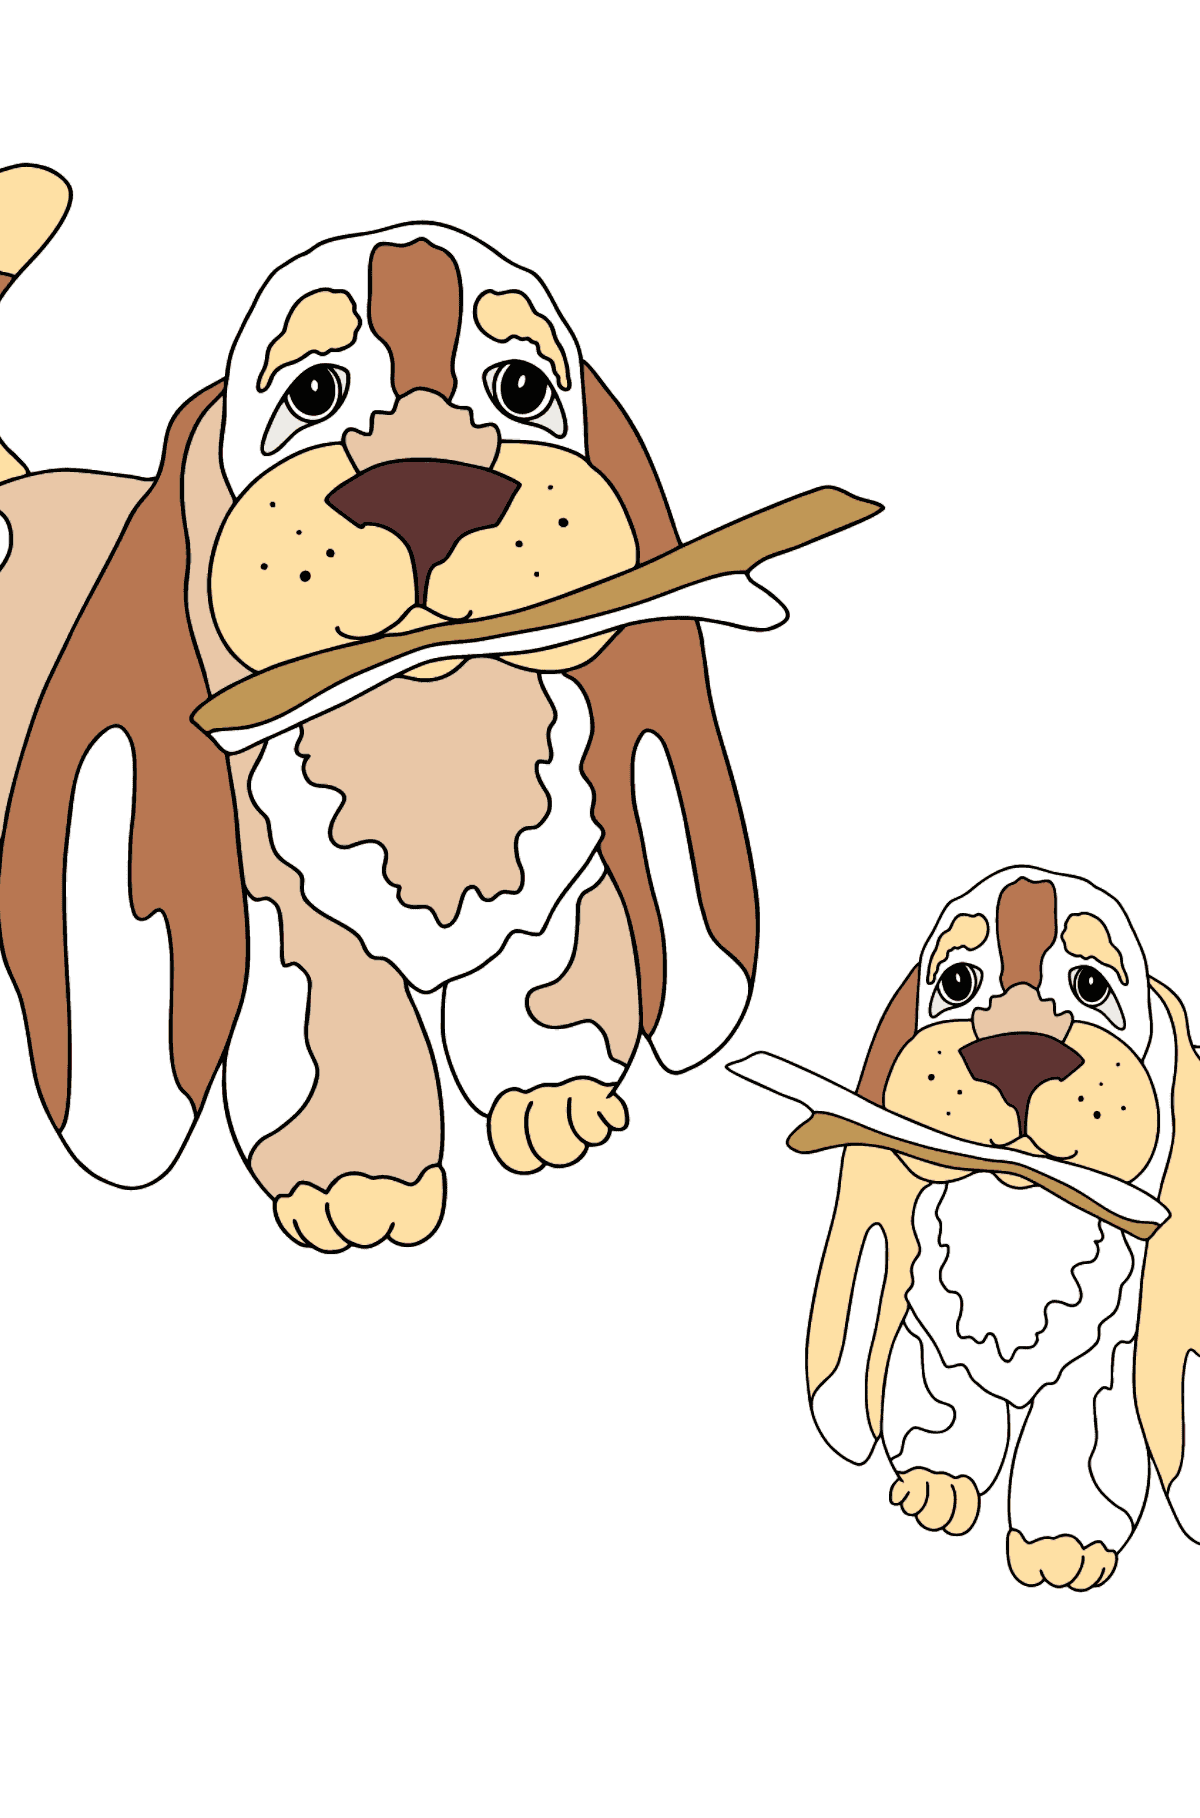 Coloring Page - Two Dogs are Playing with Sticks - Coloring Pages for Kids